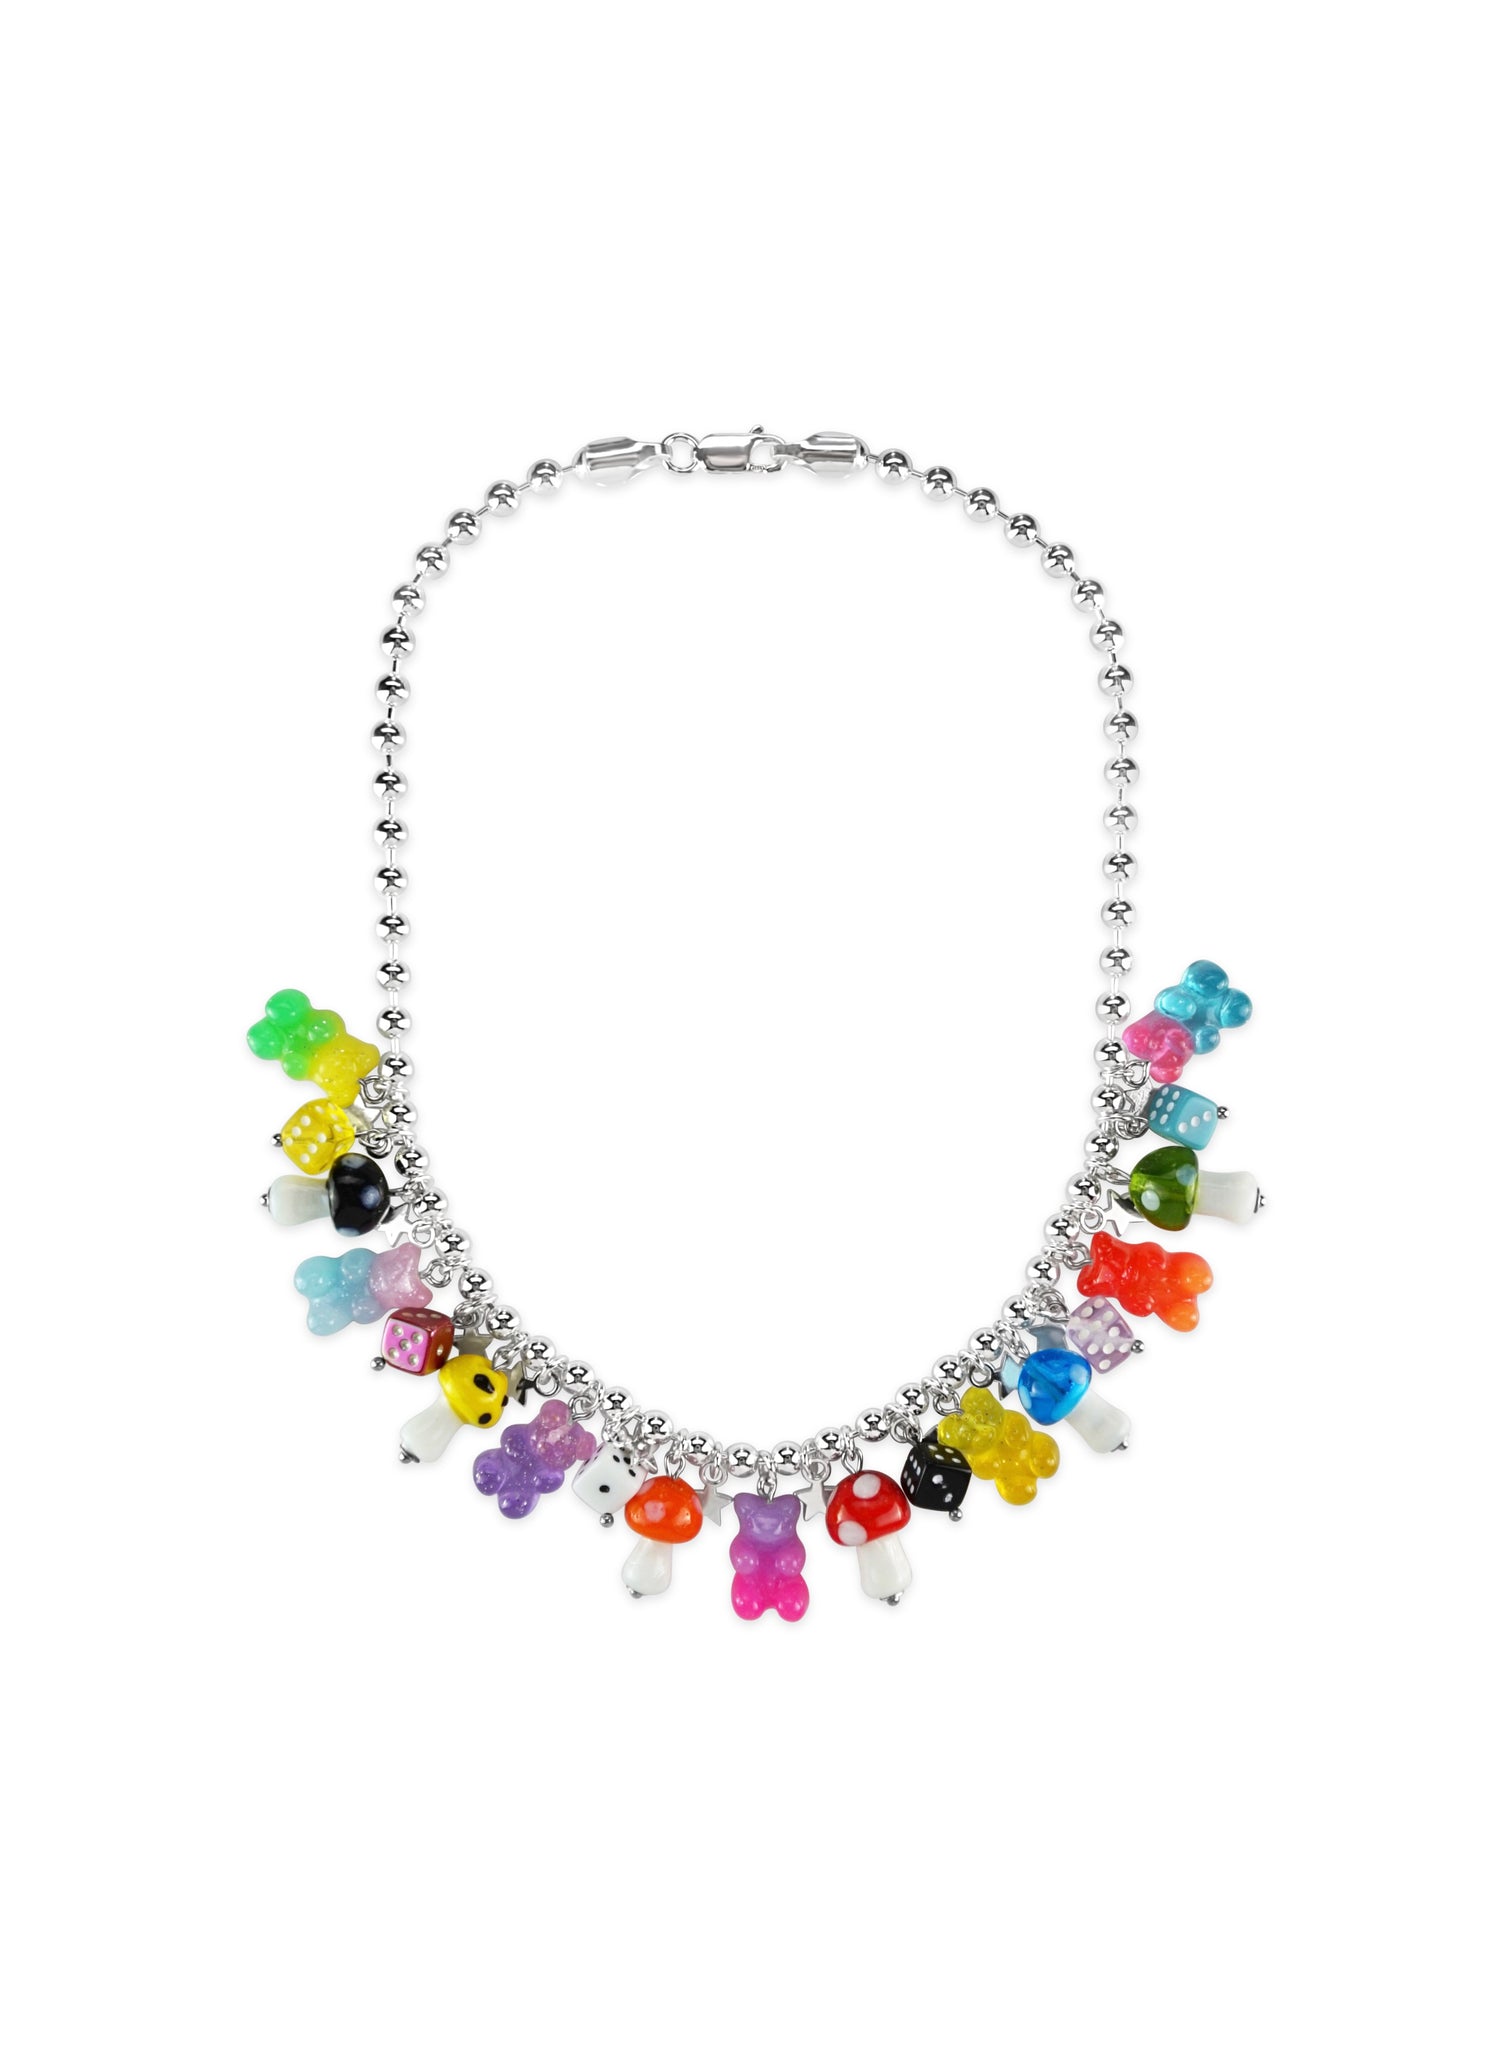 Gummy Bear & Mushroom Necklace in 16 inches